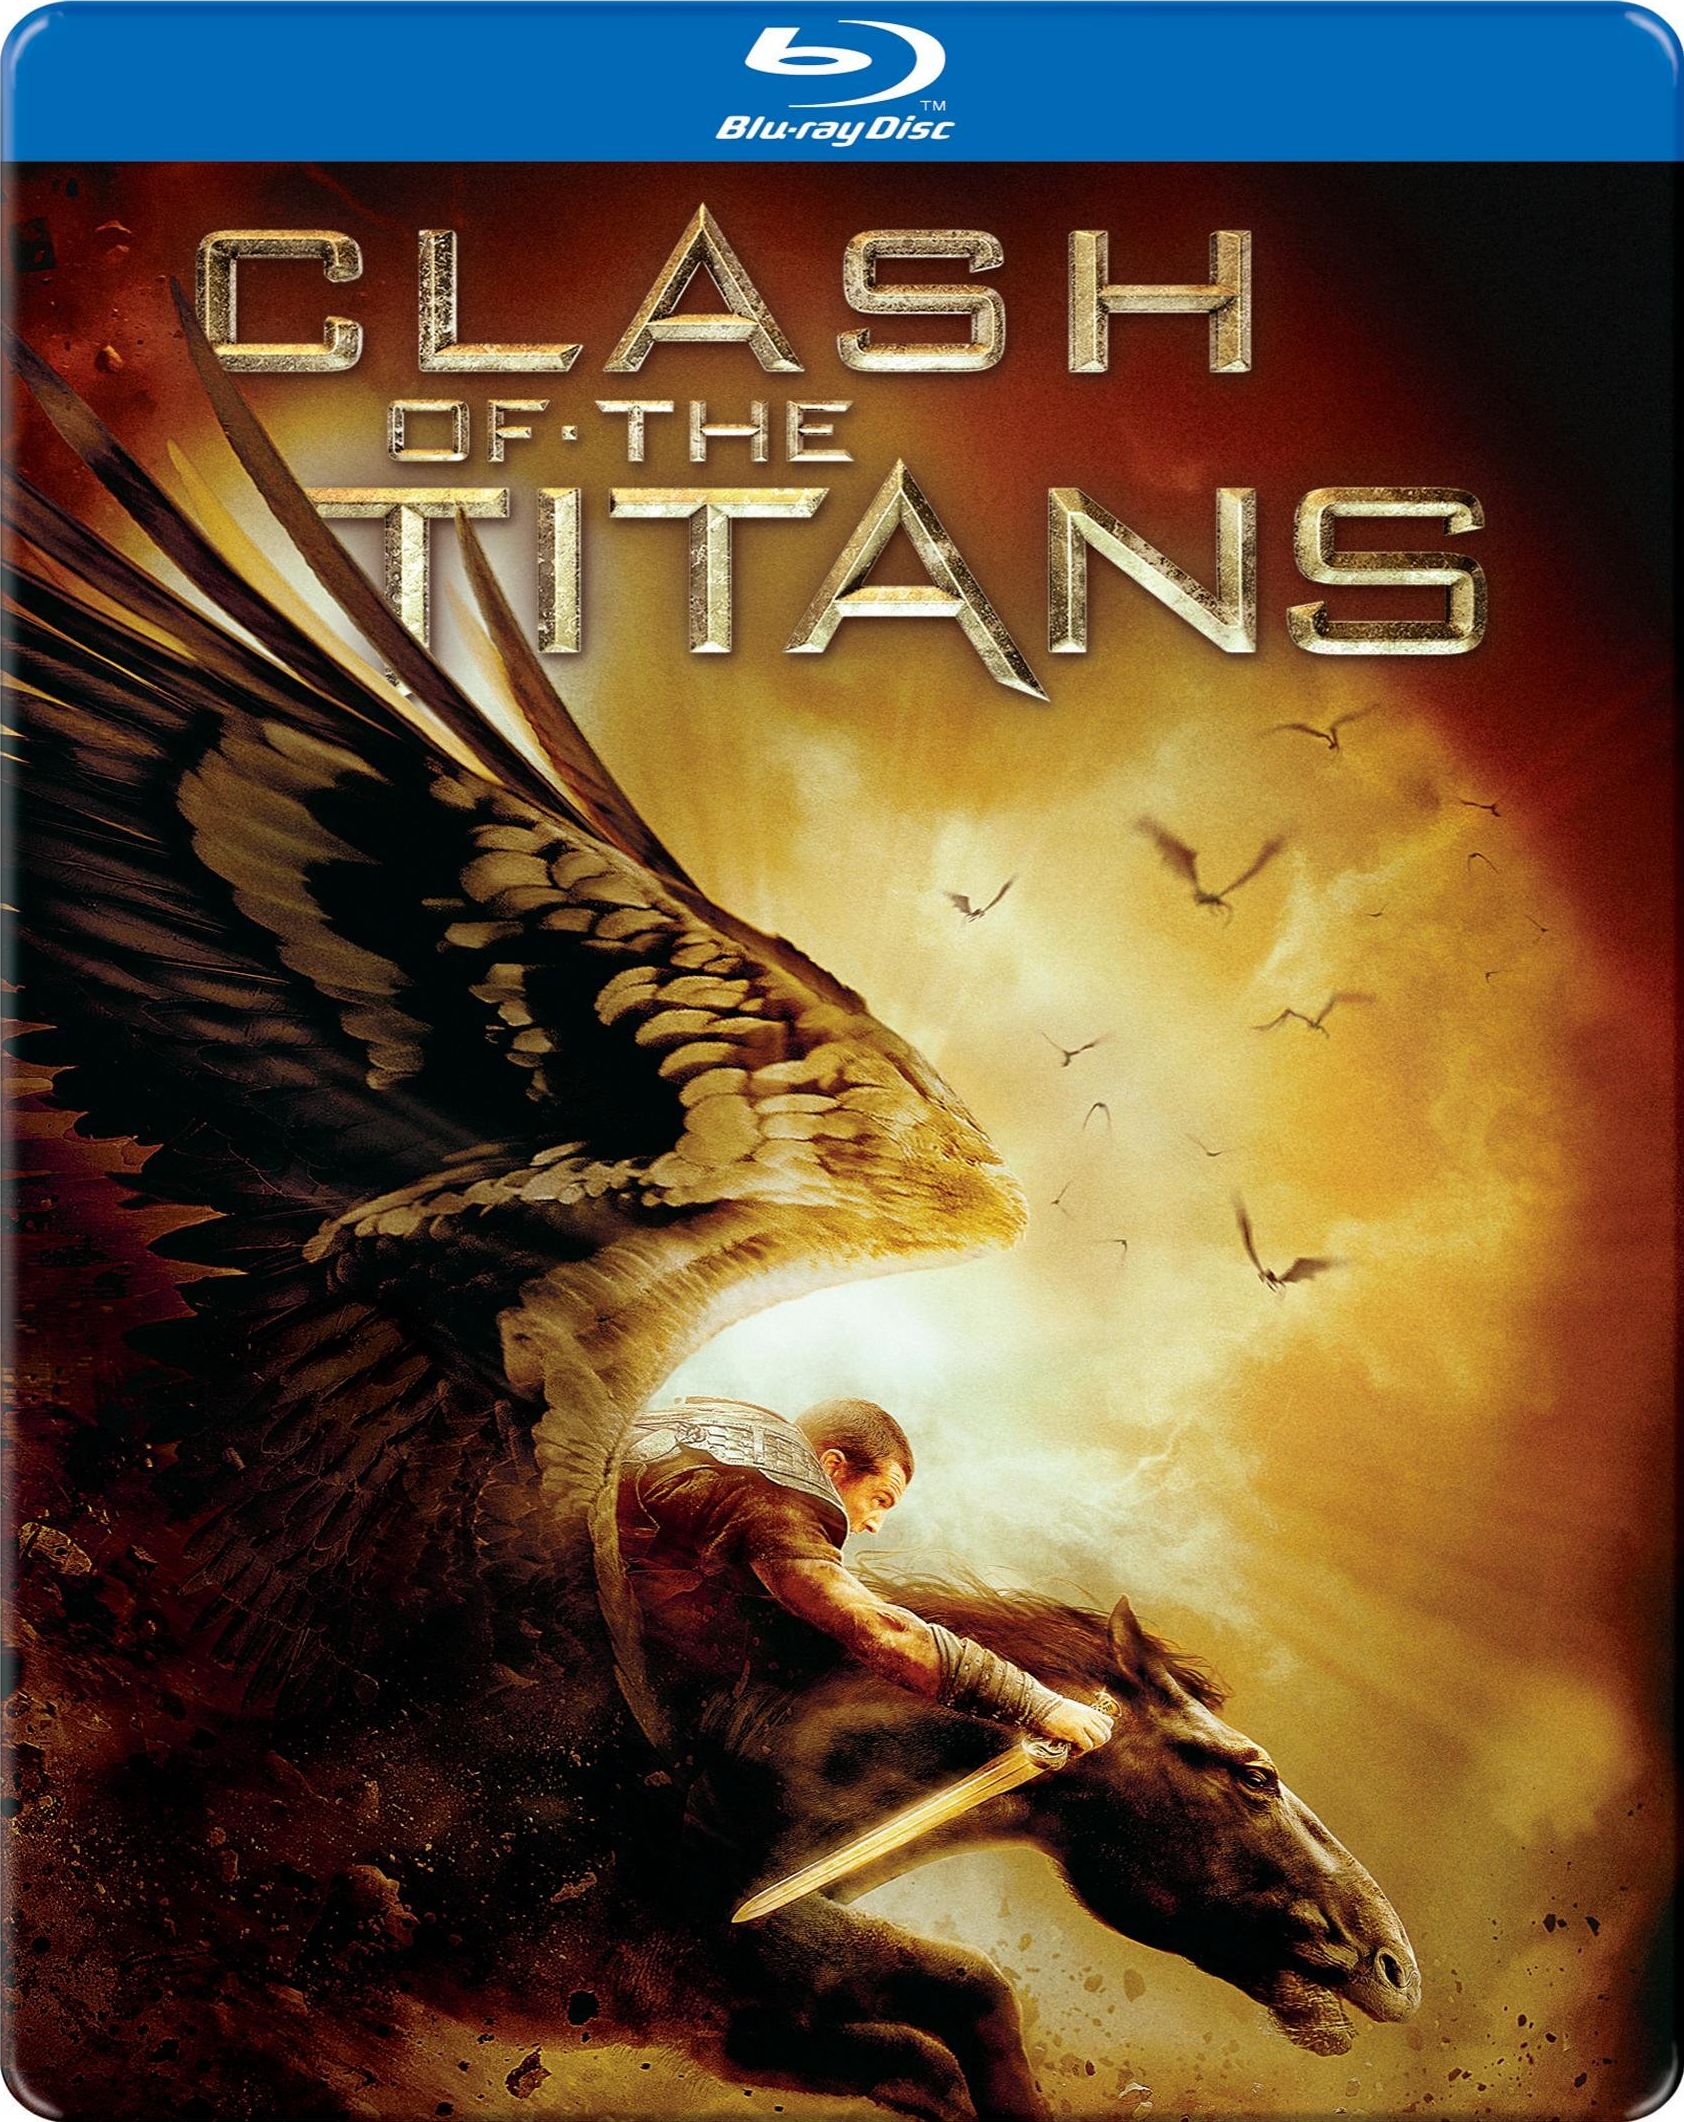 Clash of the Titans (DVD, 2010) Sealed, Unopened